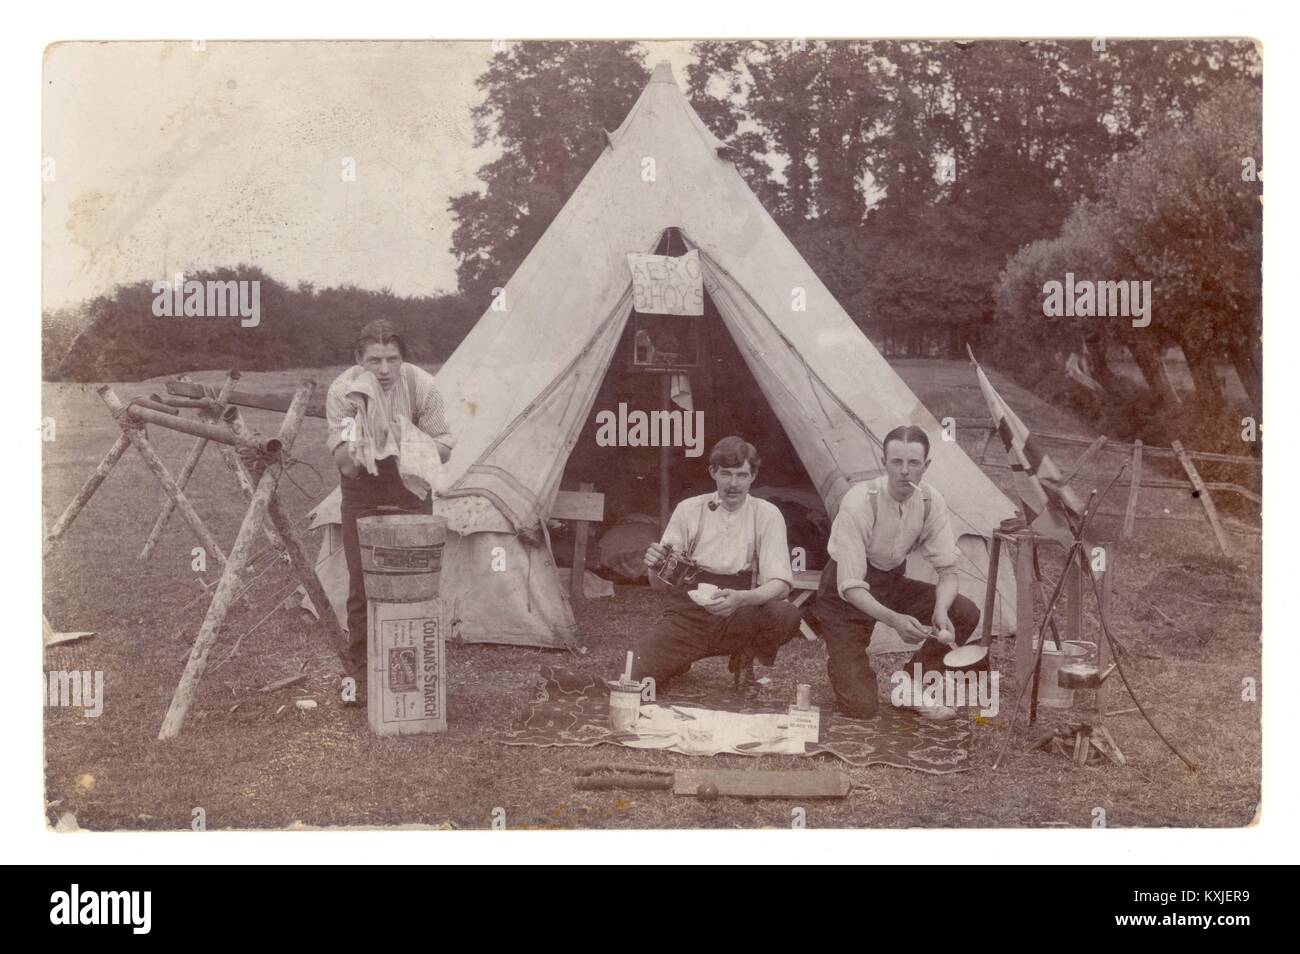 Early WW1 era postcard of young men camping, Aero Bhoys sign in the tent, possibly young aviators from Brooklands Aero Club, Surrey or camp nickname or just young men having fun, circa 1914 Stock Photo